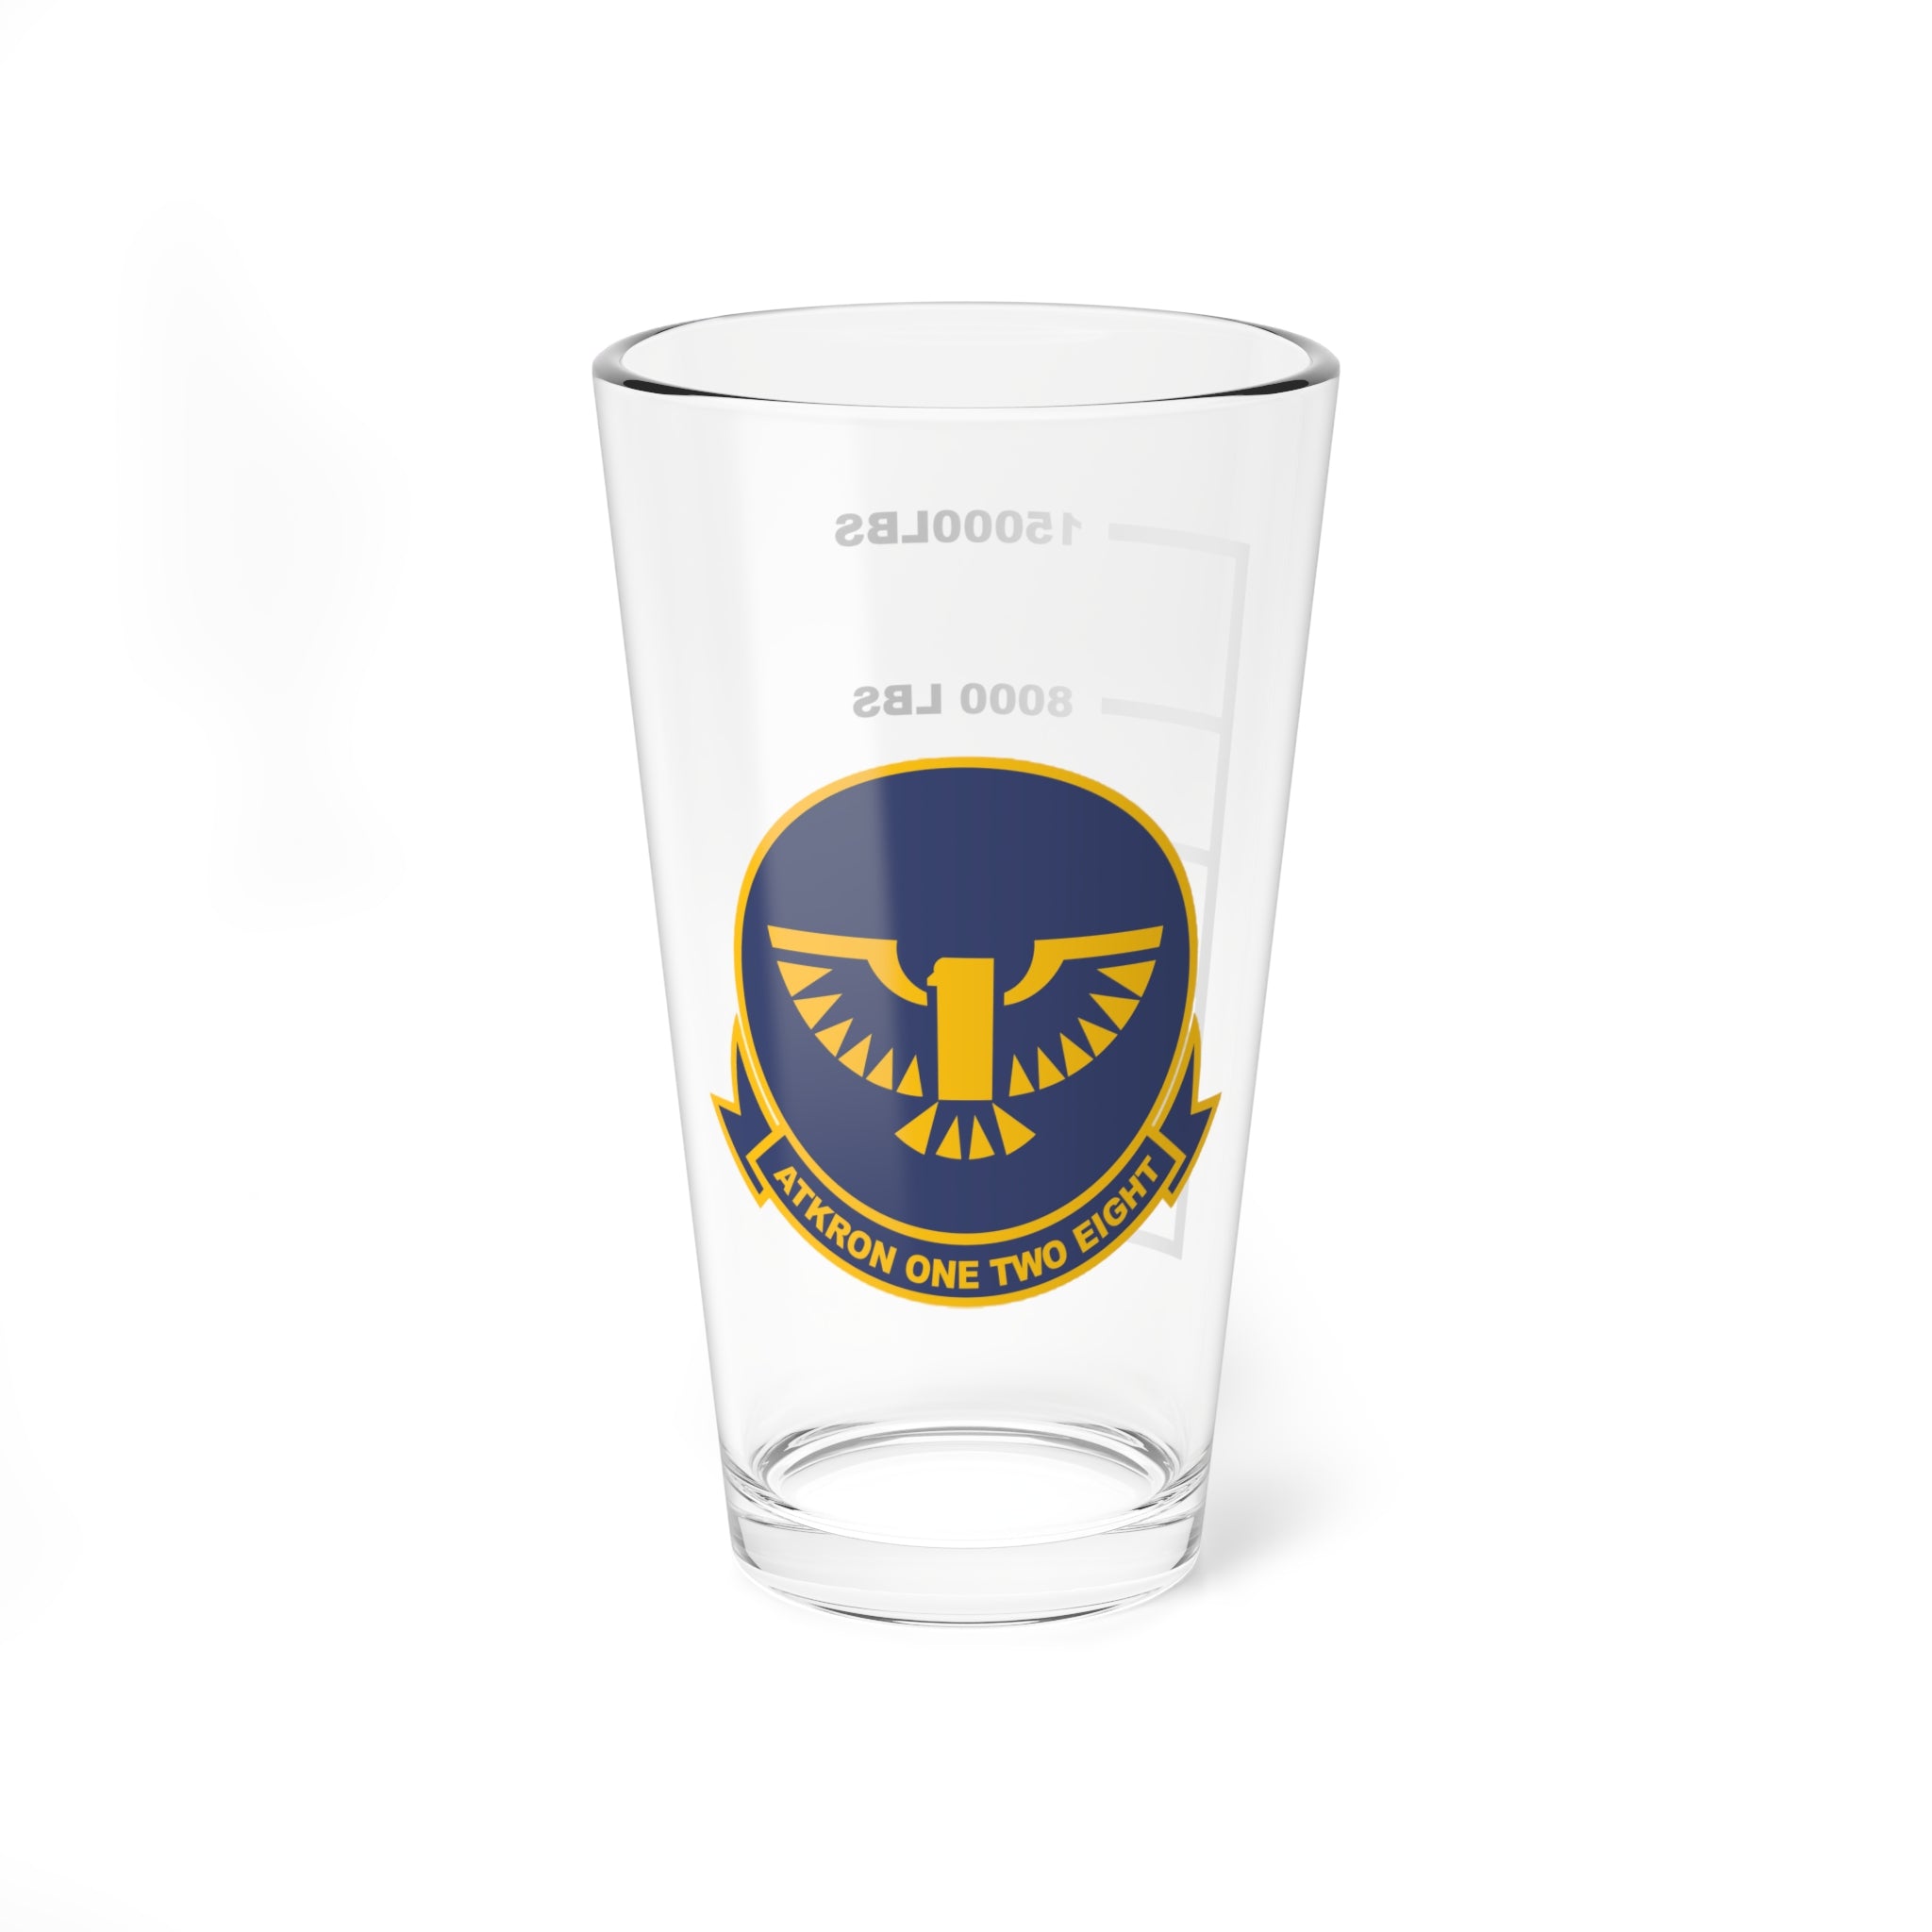 VA-128 "Golden Intruders" Fuel Low Pint Glass, Navy Attack Squadron Flying the A-6 Intruder